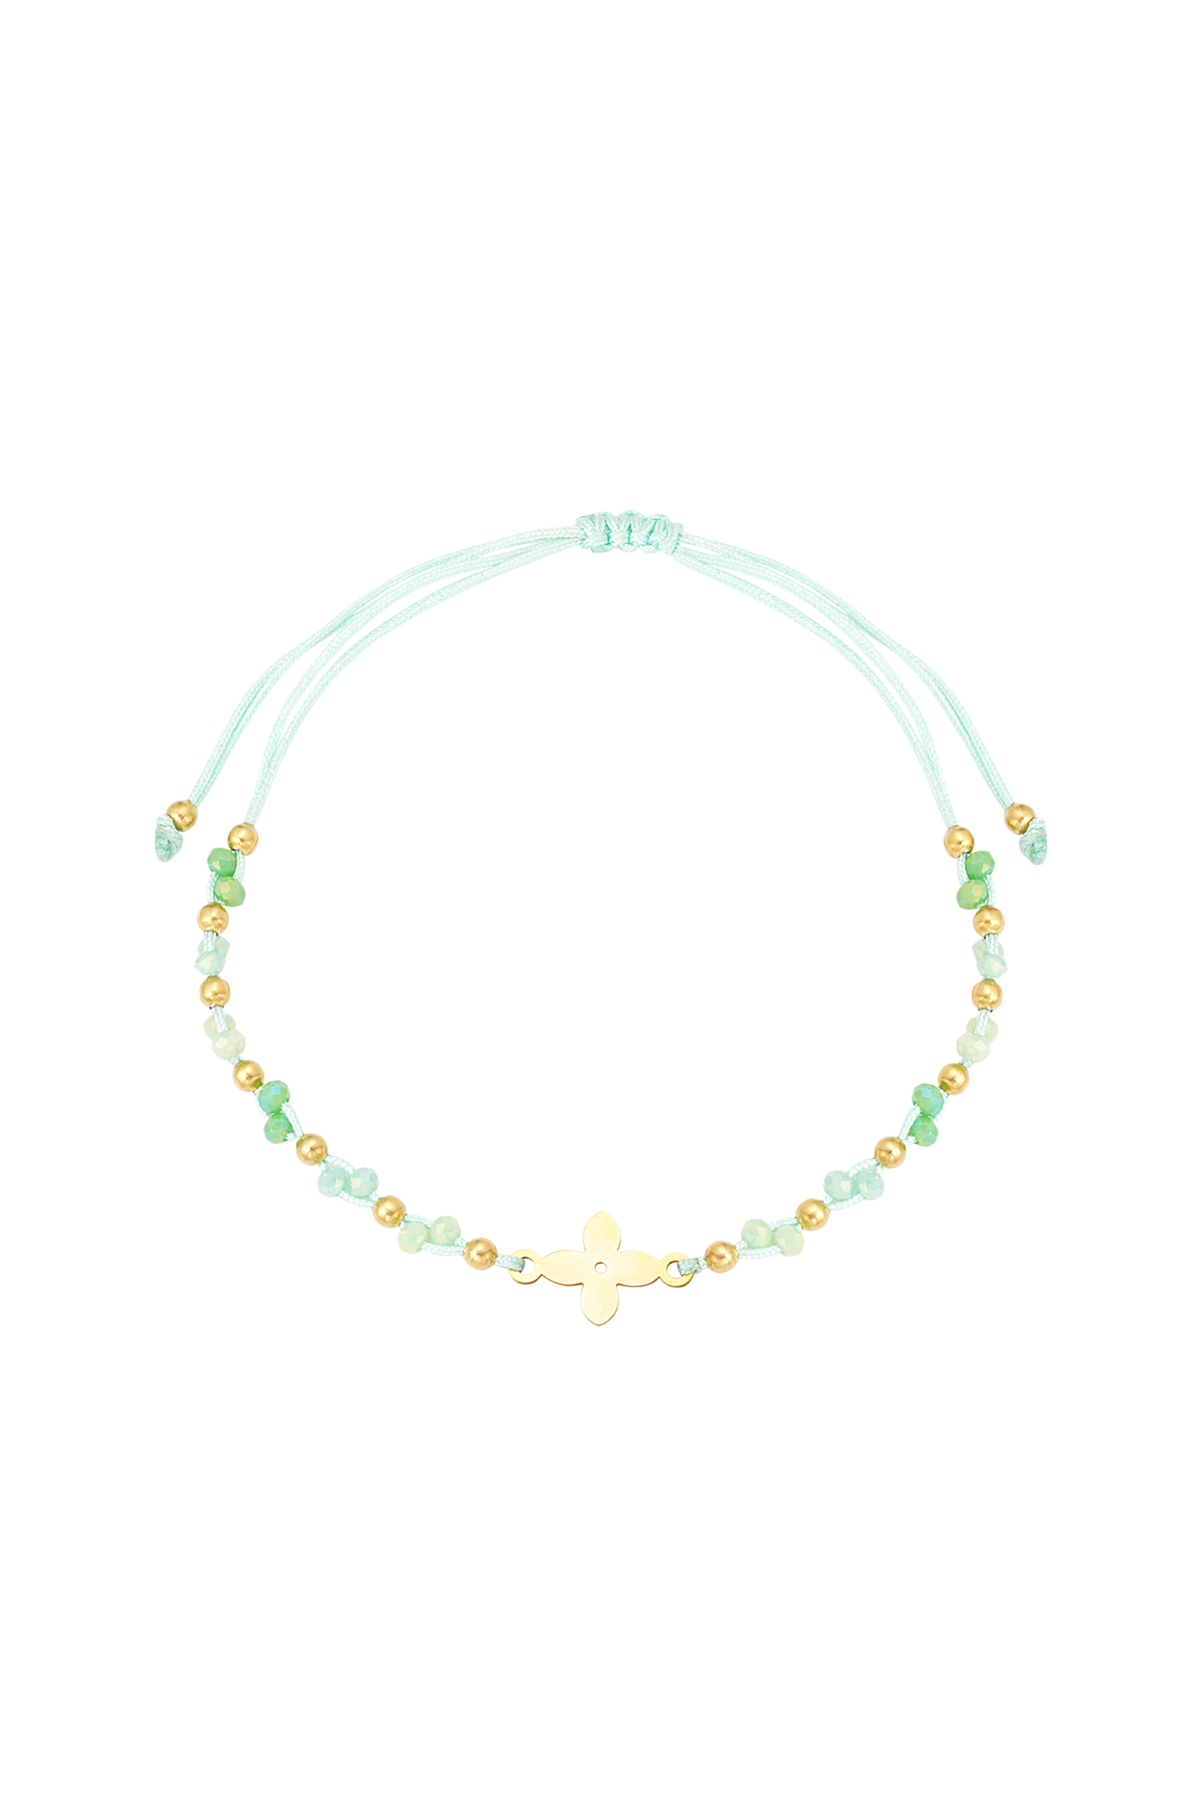 summer bracelet with beads - green / gold